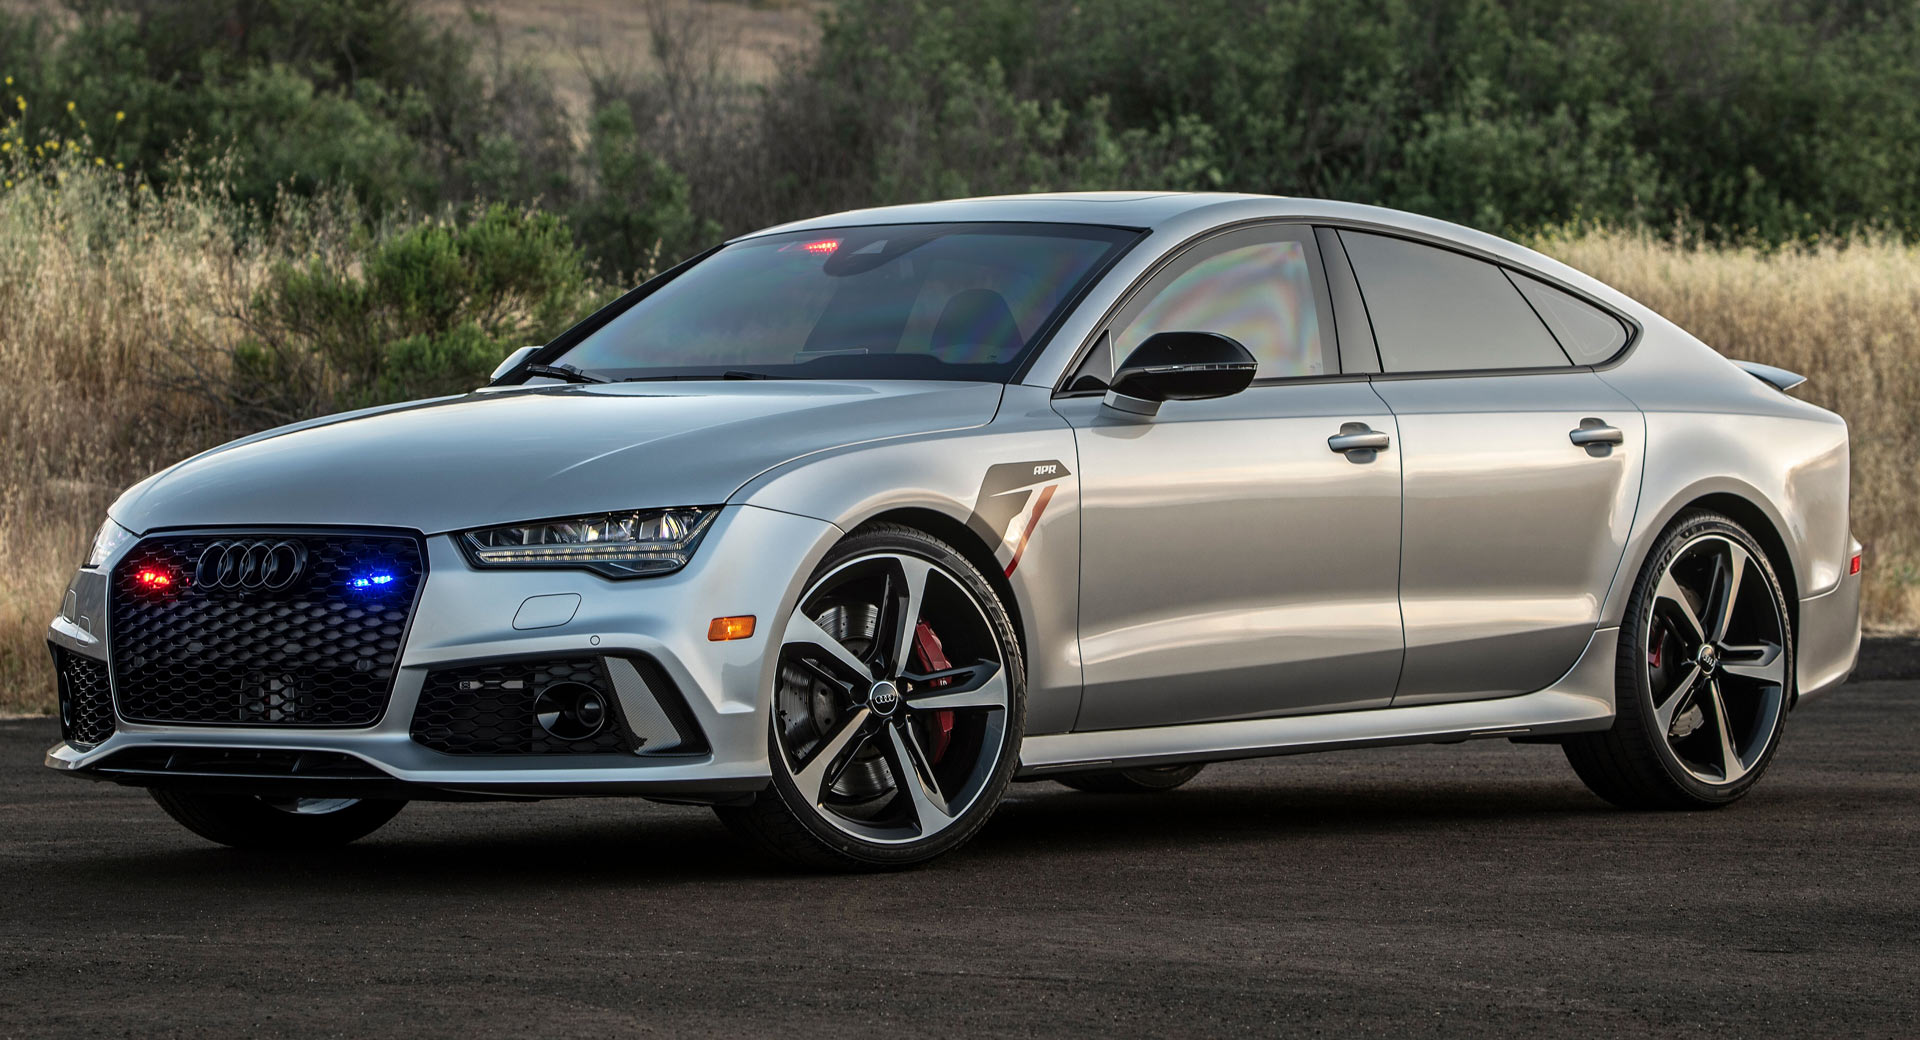 Meet The World\u0026#39;s Fastest Armored Car - A Tuned Audi RS7 With A Top ...